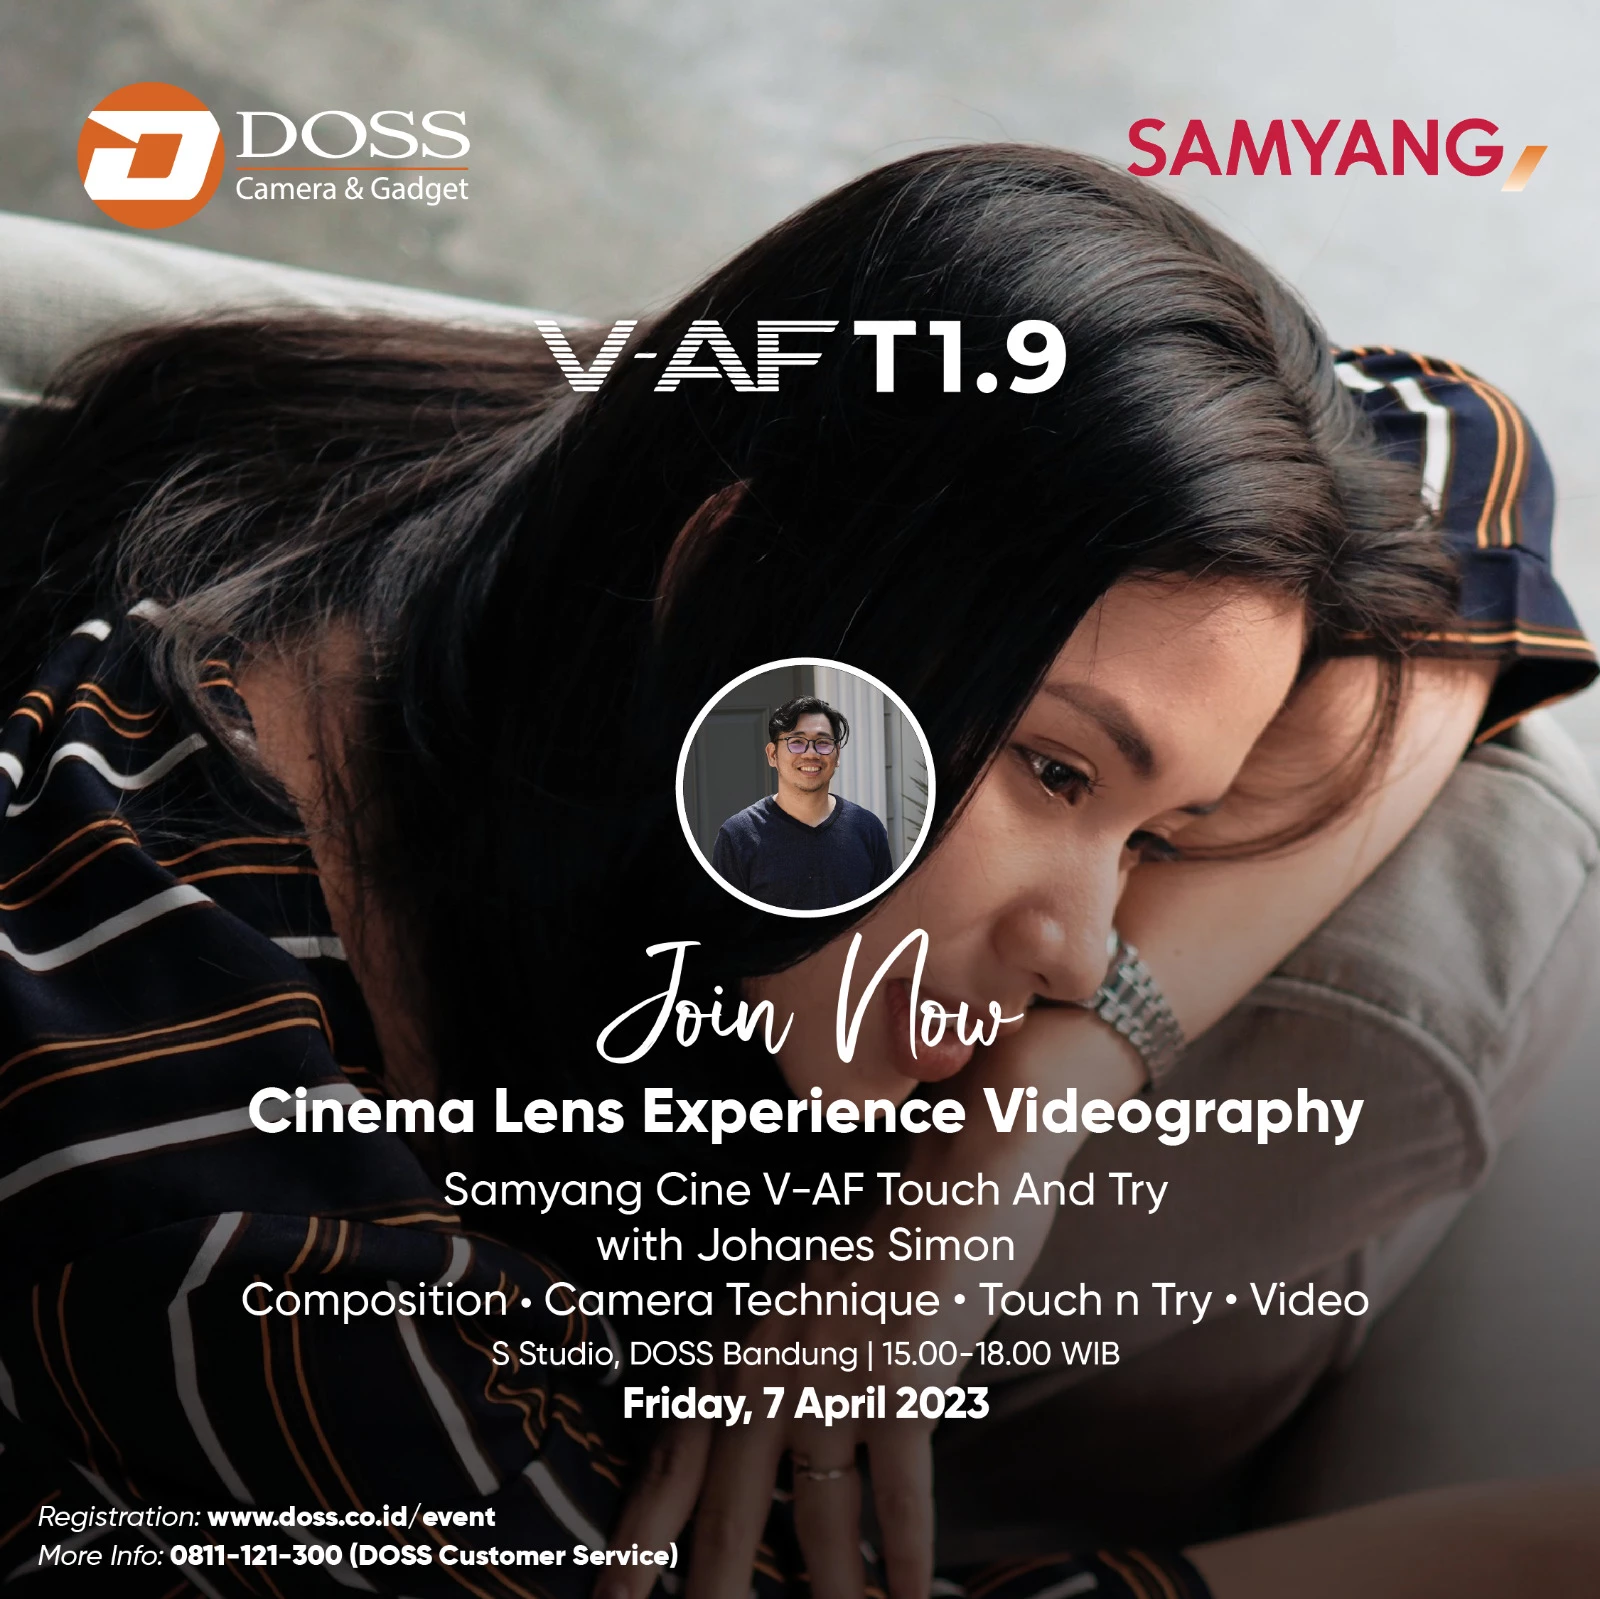 Samyang Cine V-AF Touch & Try with Johanes Simon